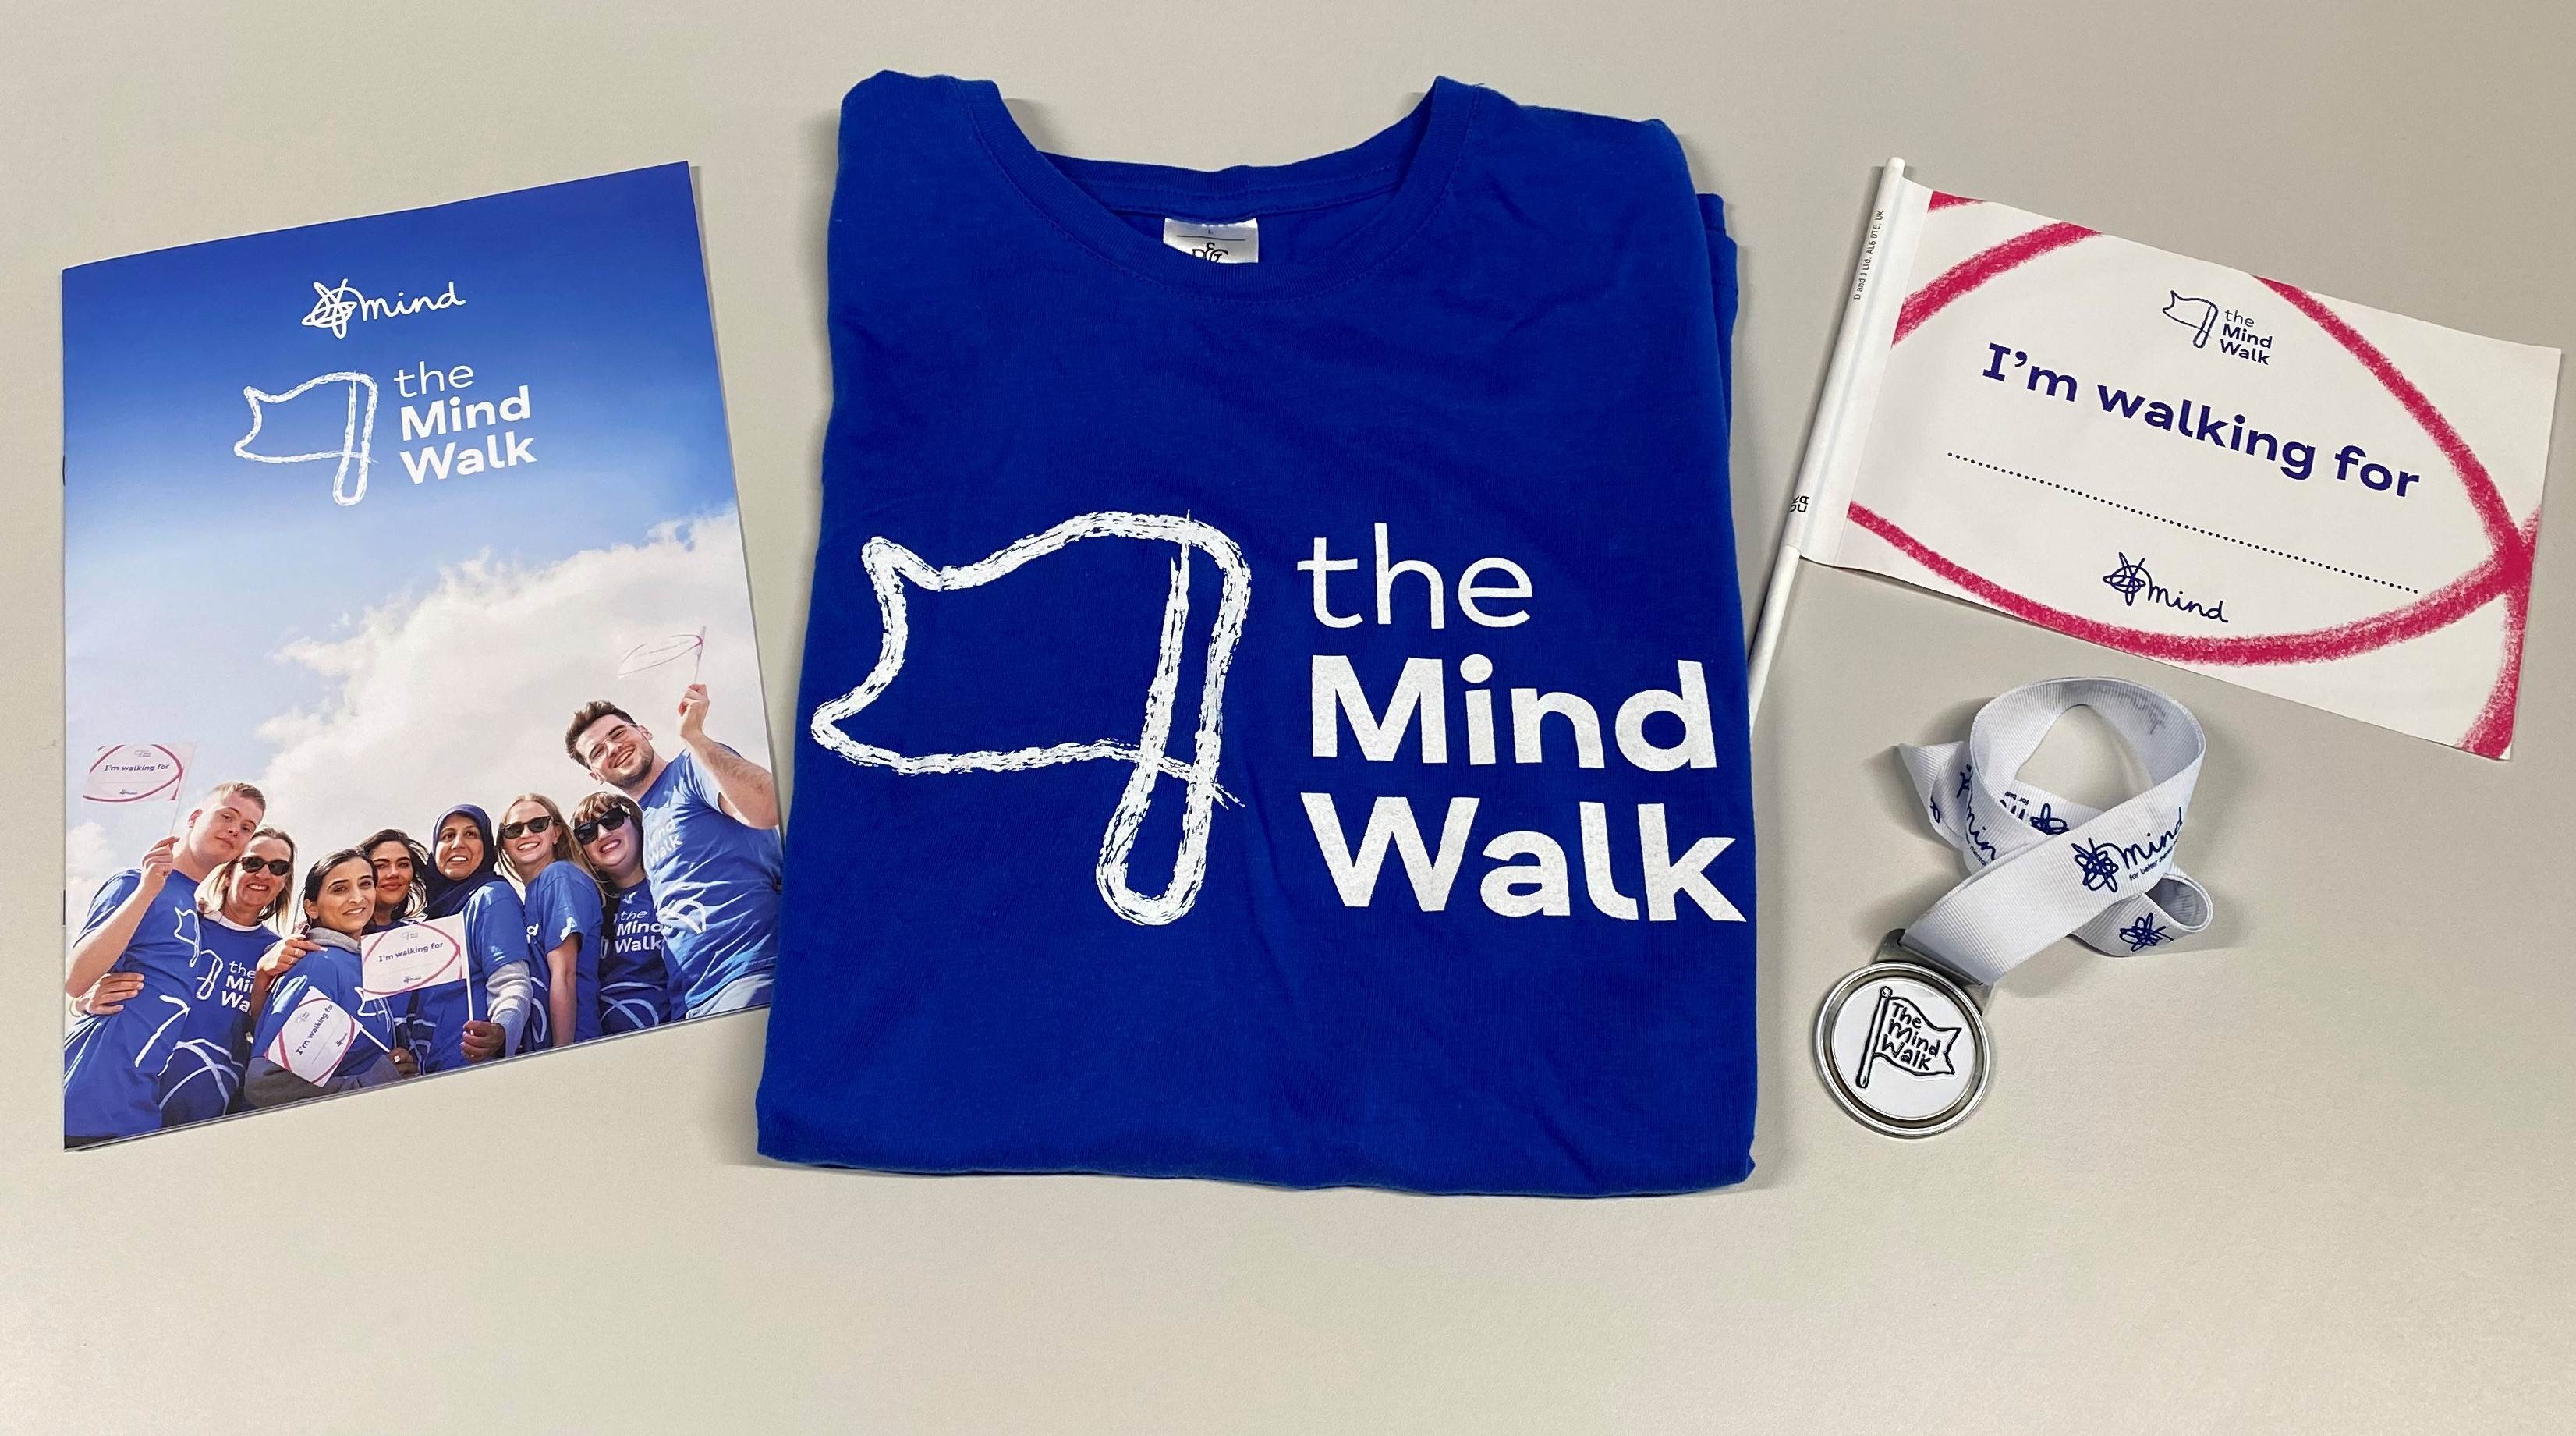 Image of a fundraising pack, t-shirt, flag and medal